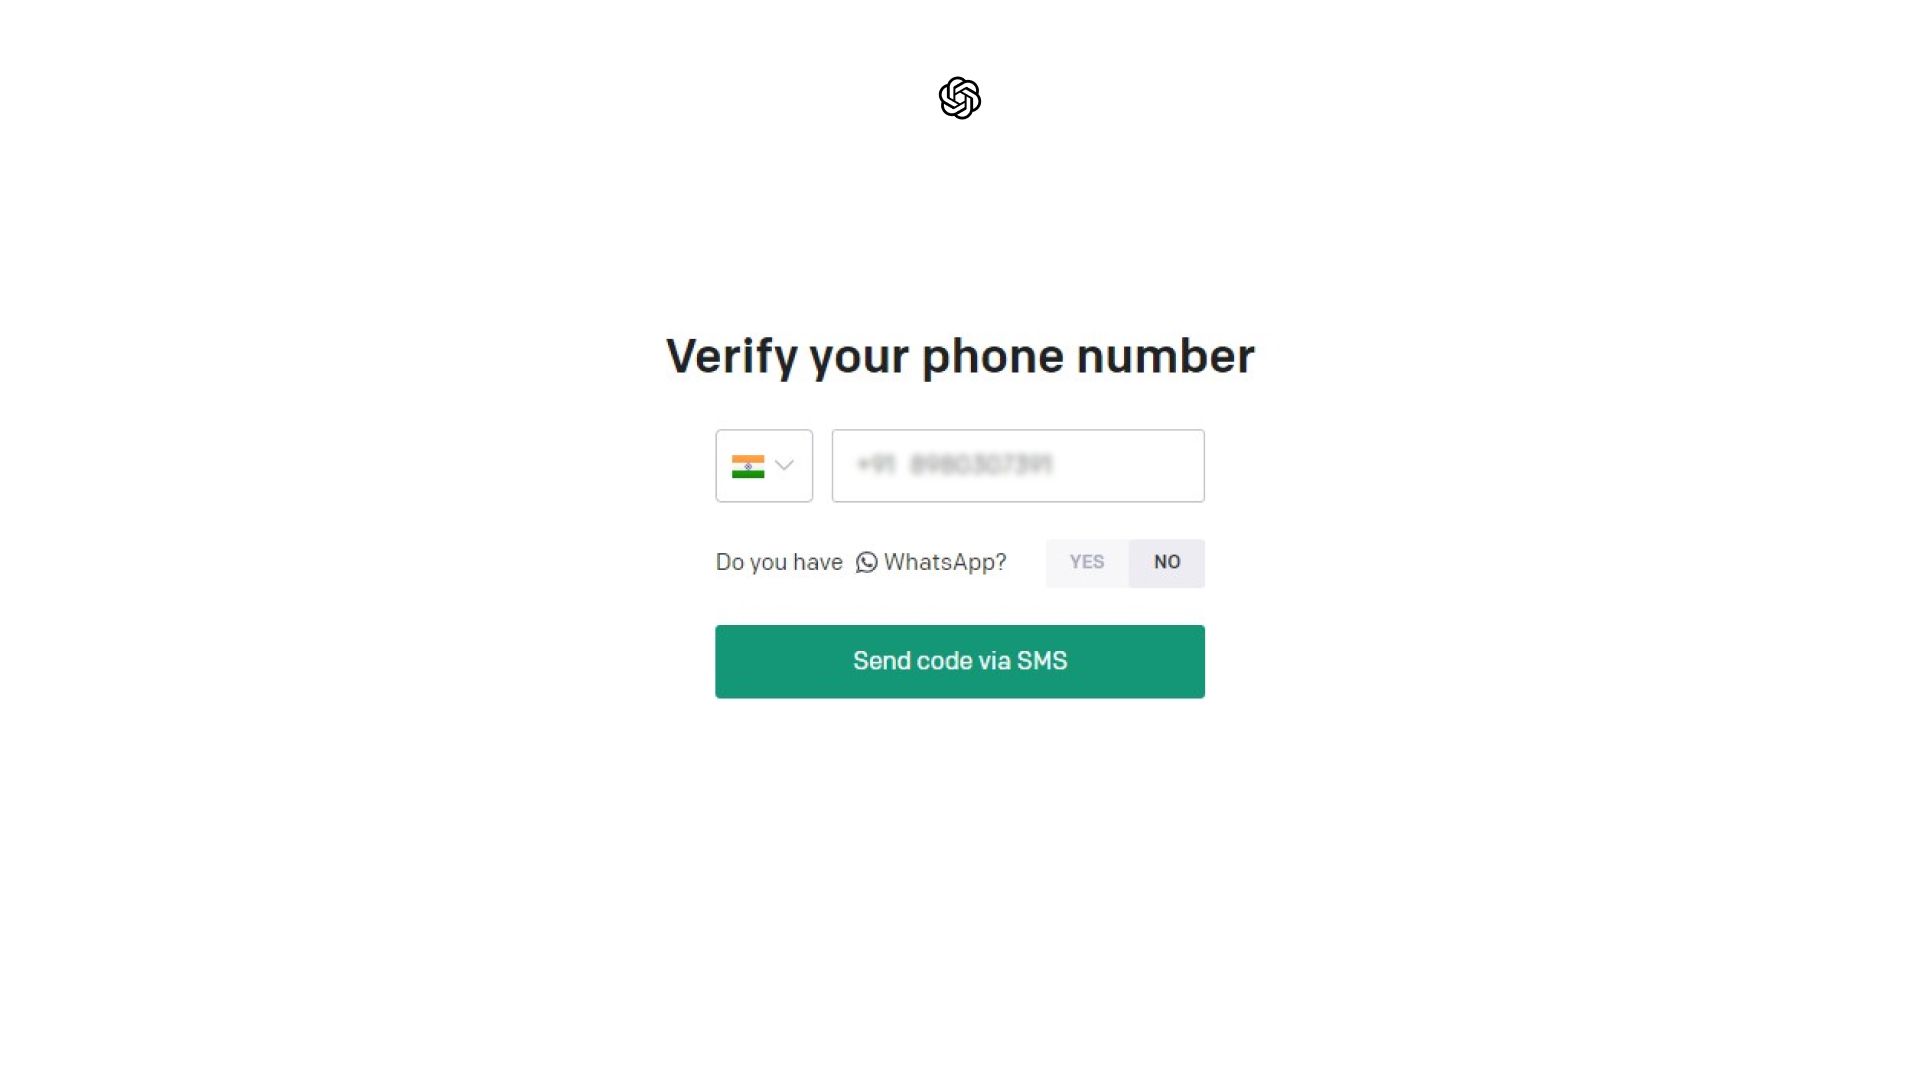 now verify the mobile number